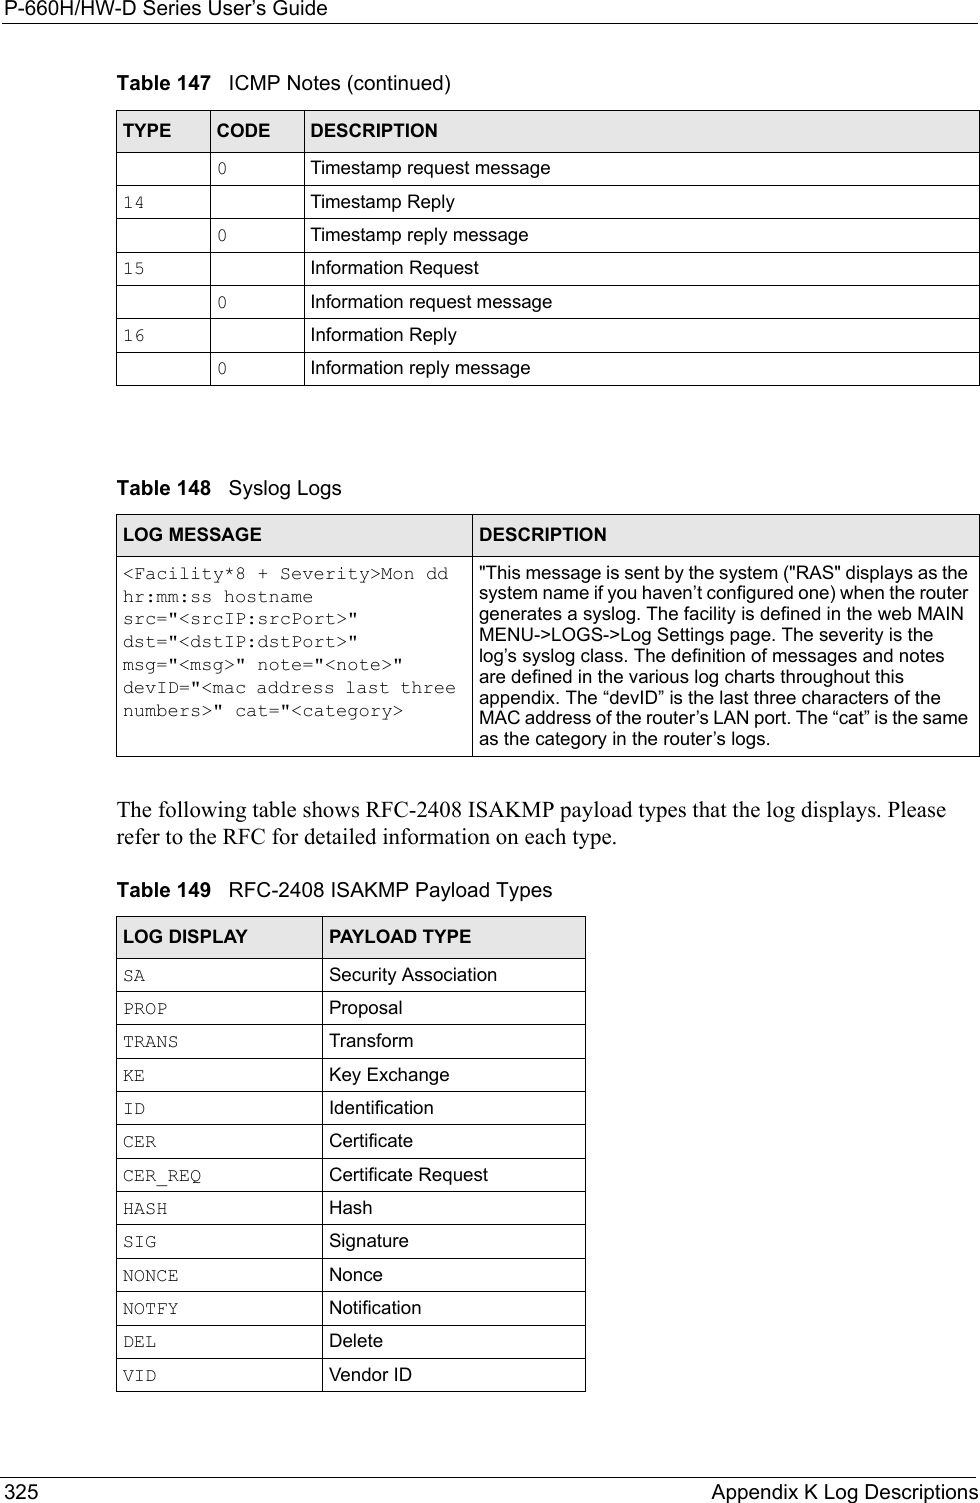 P-660H/HW-D Series User’s Guide325 Appendix K Log Descriptions The following table shows RFC-2408 ISAKMP payload types that the log displays. Please refer to the RFC for detailed information on each type. 0Timestamp request message14 Timestamp Reply0Timestamp reply message15 Information Request0Information request message16 Information Reply0Information reply messageTable 148   Syslog LogsLOG MESSAGE DESCRIPTION&lt;Facility*8 + Severity&gt;Mon dd hr:mm:ss hostname src=&quot;&lt;srcIP:srcPort&gt;&quot; dst=&quot;&lt;dstIP:dstPort&gt;&quot; msg=&quot;&lt;msg&gt;&quot; note=&quot;&lt;note&gt;&quot; devID=&quot;&lt;mac address last three numbers&gt;&quot; cat=&quot;&lt;category&gt;&quot;This message is sent by the system (&quot;RAS&quot; displays as the system name if you haven’t configured one) when the router generates a syslog. The facility is defined in the web MAIN MENU-&gt;LOGS-&gt;Log Settings page. The severity is the log’s syslog class. The definition of messages and notes are defined in the various log charts throughout this appendix. The “devID” is the last three characters of the MAC address of the router’s LAN port. The “cat” is the same as the category in the router’s logs.Table 149   RFC-2408 ISAKMP Payload TypesLOG DISPLAY PAYLOAD TYPESA Security AssociationPROP ProposalTRANS TransformKE Key ExchangeID IdentificationCER CertificateCER_REQ Certificate RequestHASH HashSIG SignatureNONCE NonceNOTFY NotificationDEL DeleteVID Vendor IDTable 147   ICMP Notes (continued)TYPE CODE DESCRIPTION